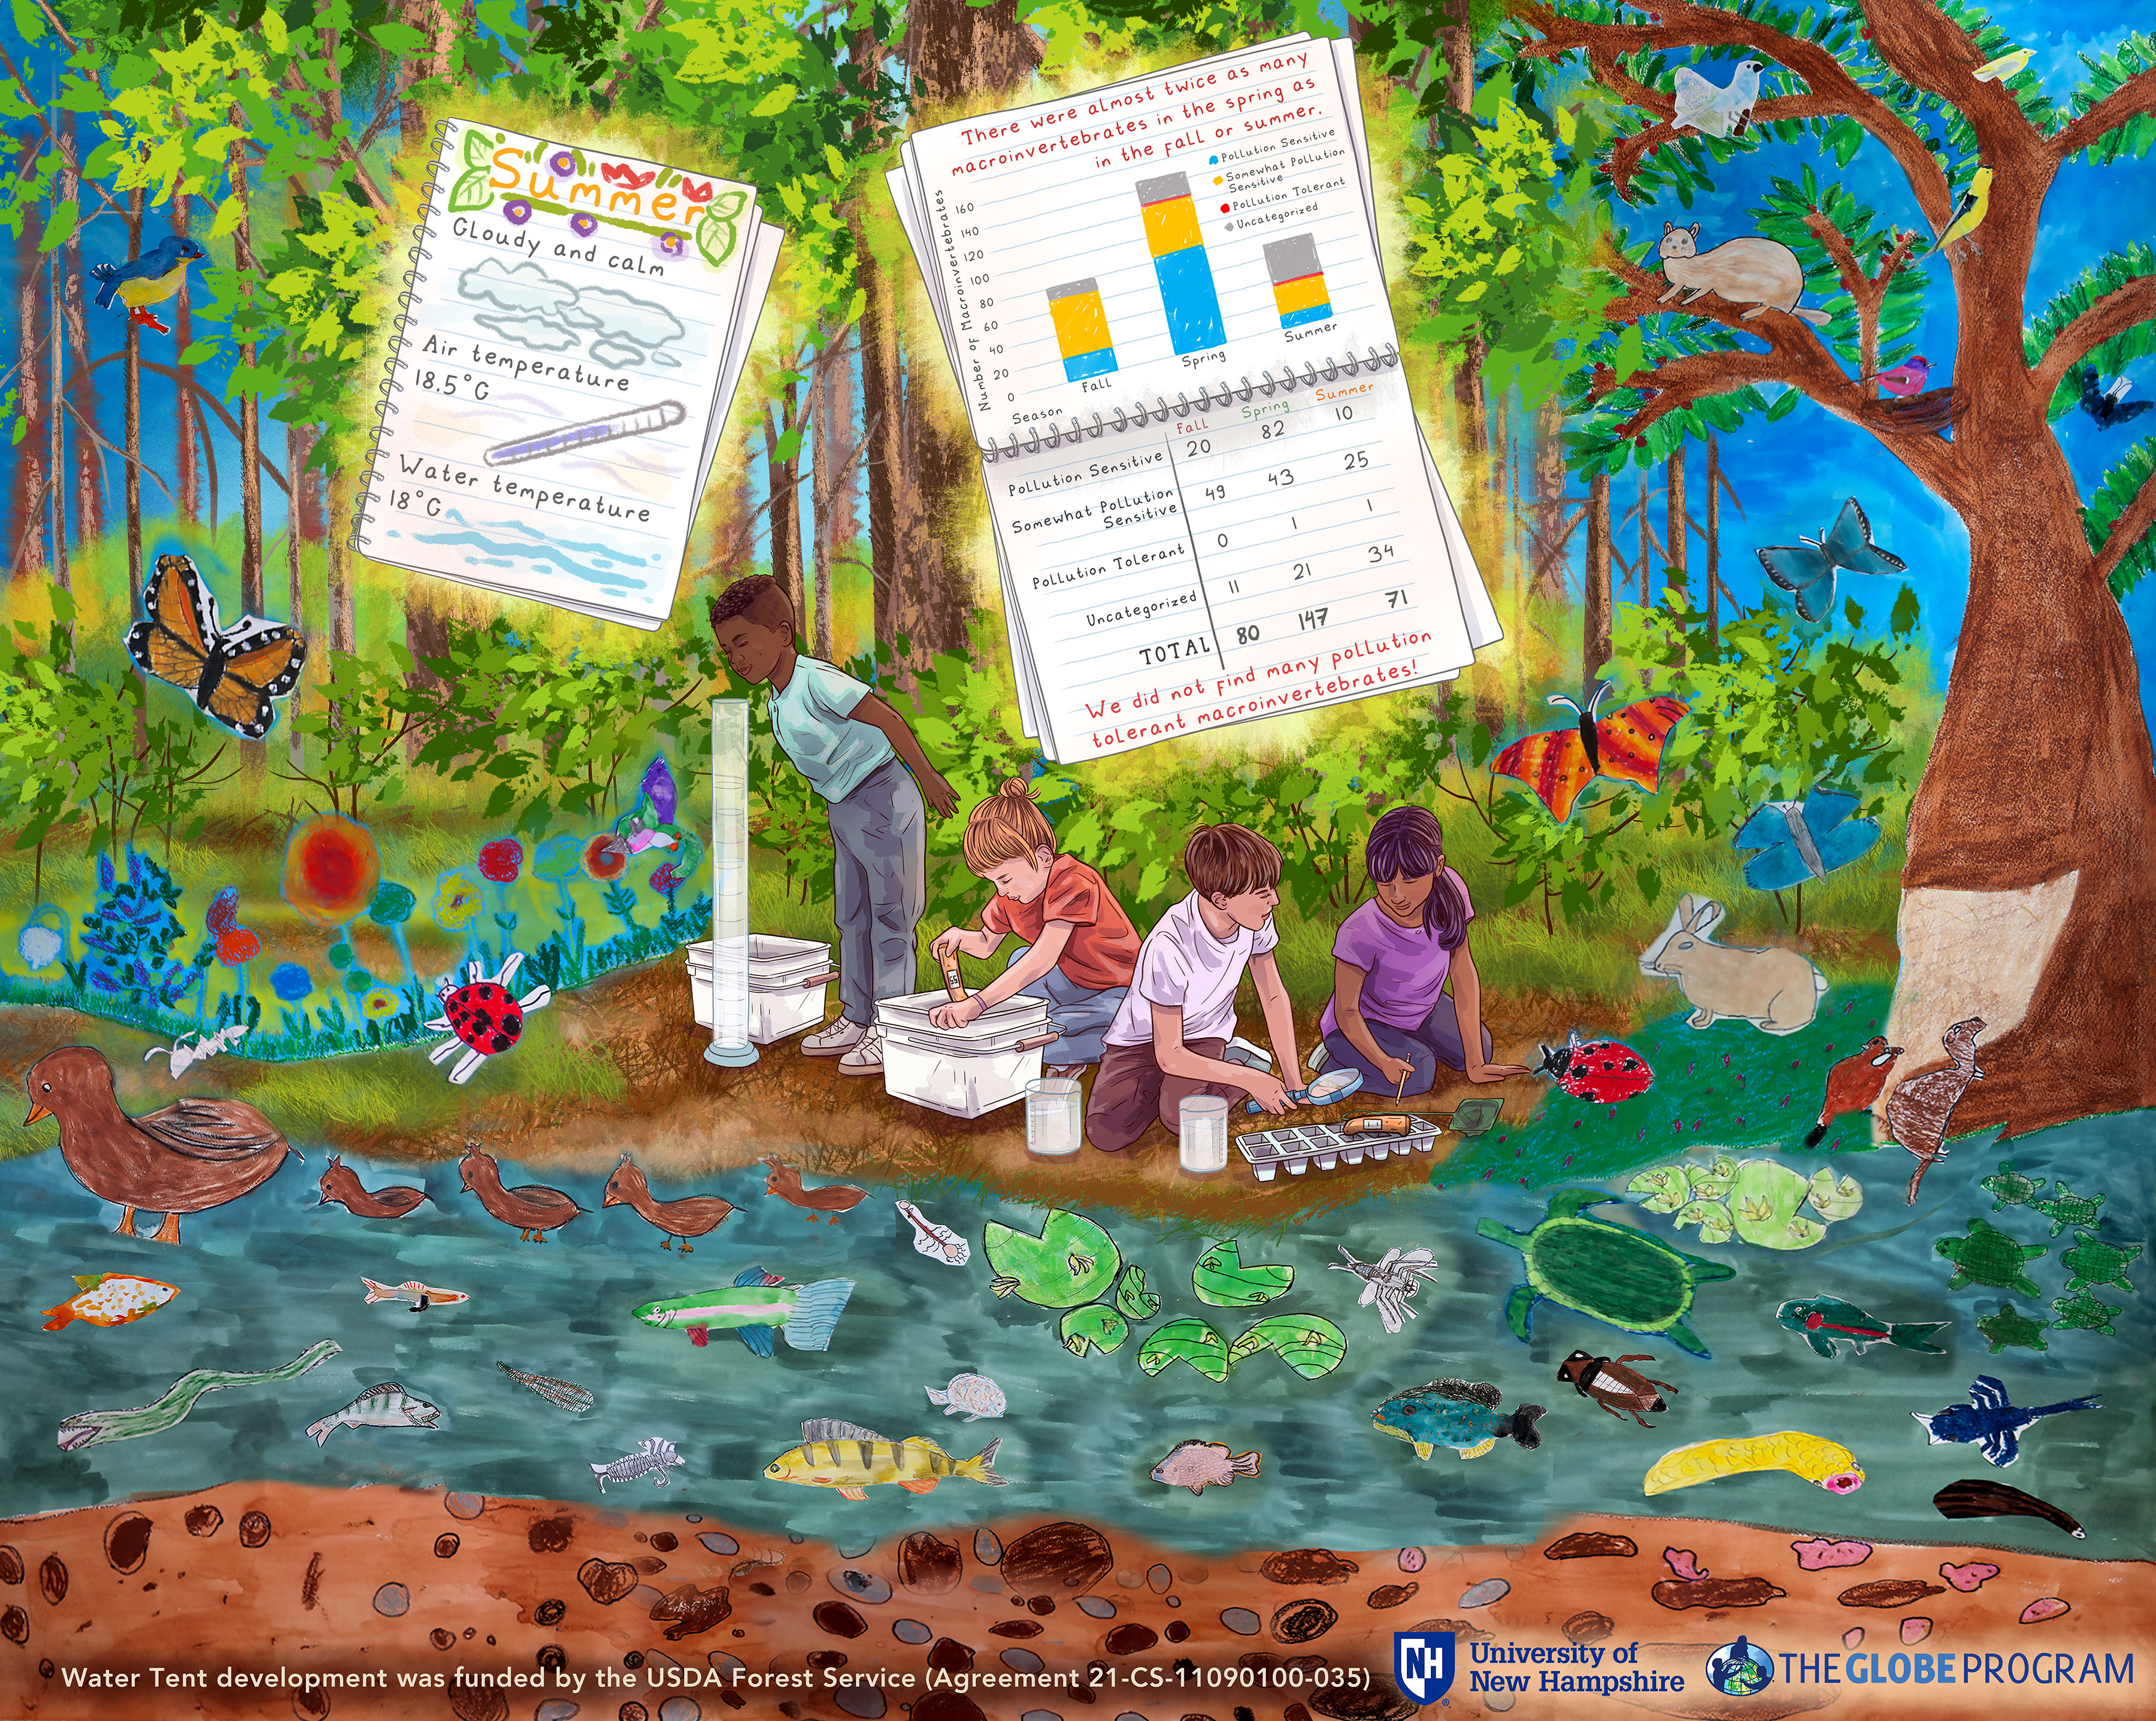 the New Hampshire Water Tent mural for the summer season shows leaves on trees, animals in the tree and water, and data sheets for weather and water data and macroinvertebrate observations throughout the seasons